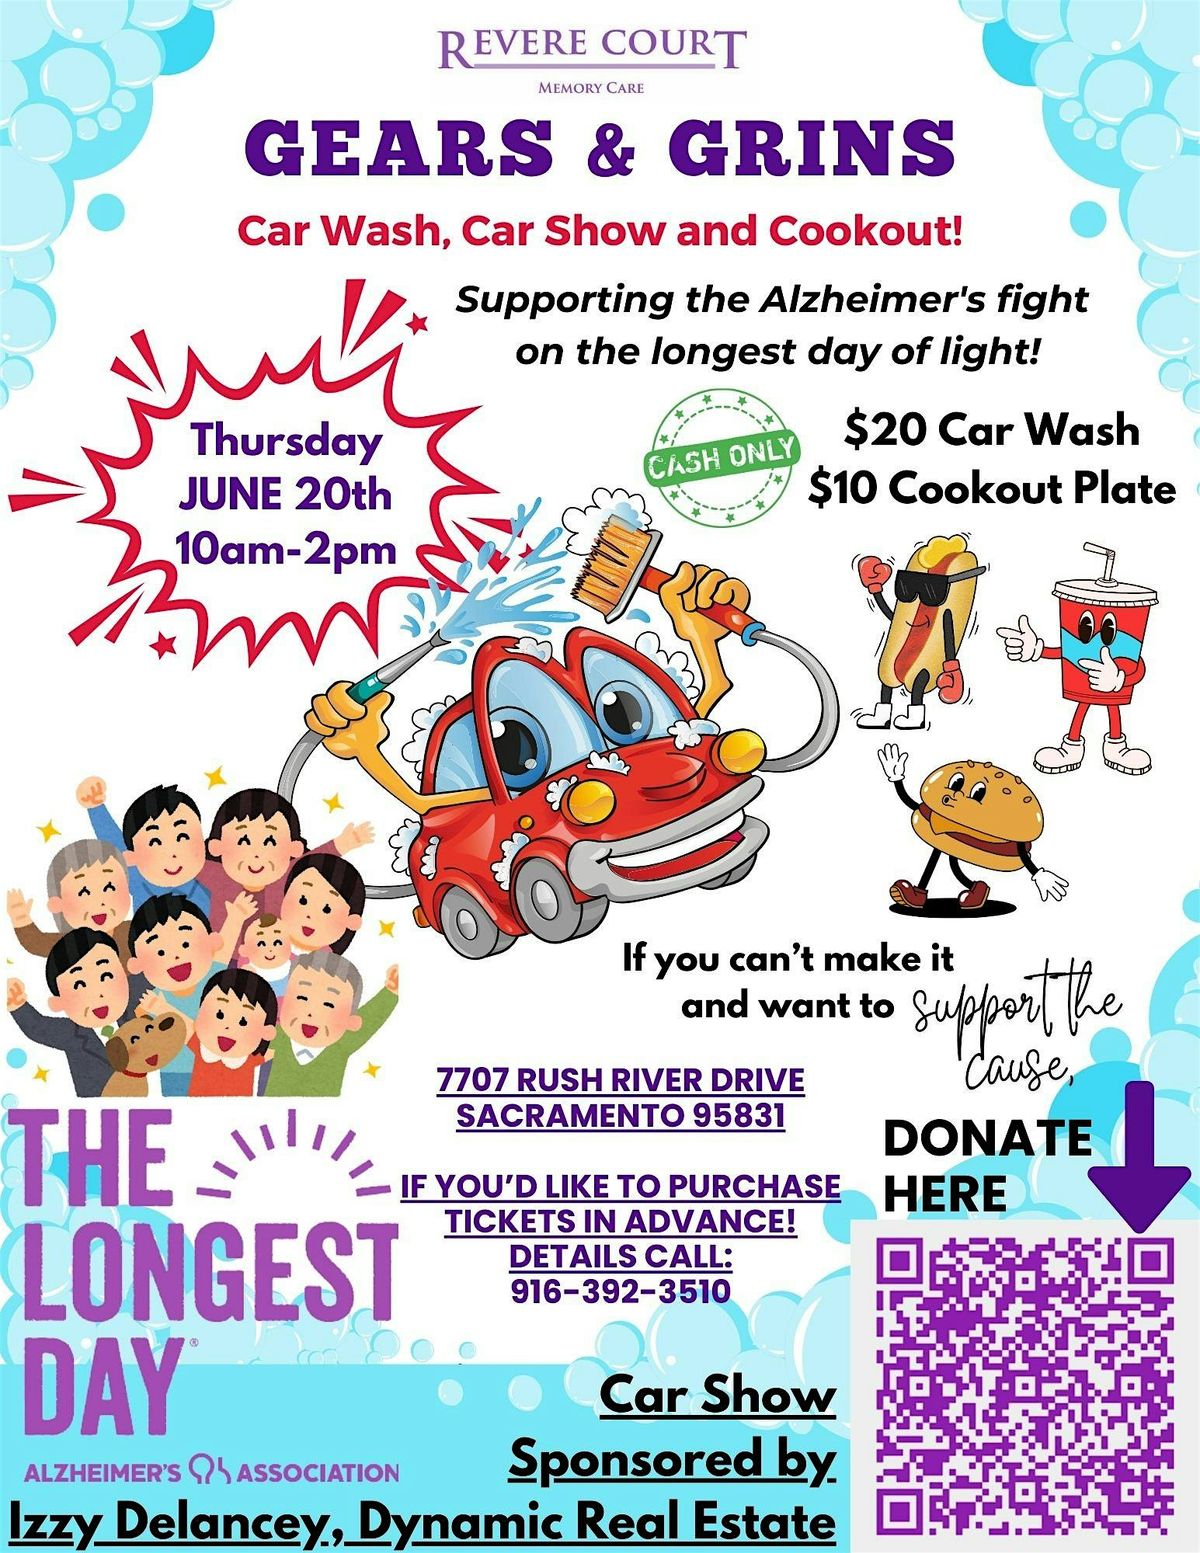 Car Wash, Car Show and Cookout to support Alzheimer's!